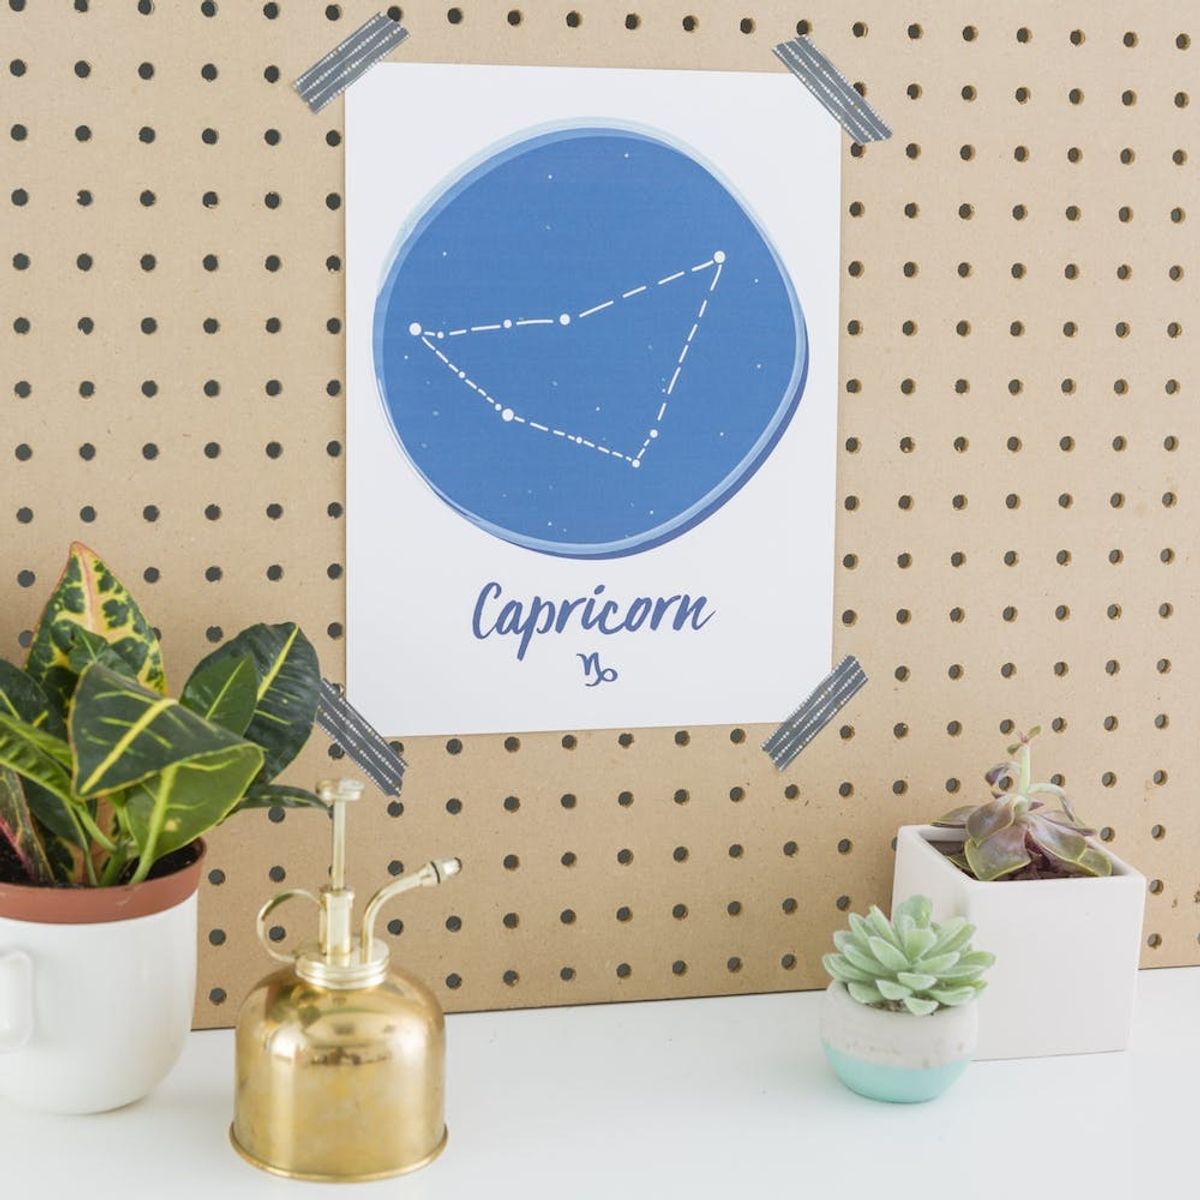 Download This Free Zodiac Wall Art to Rep Your Capricorn Status